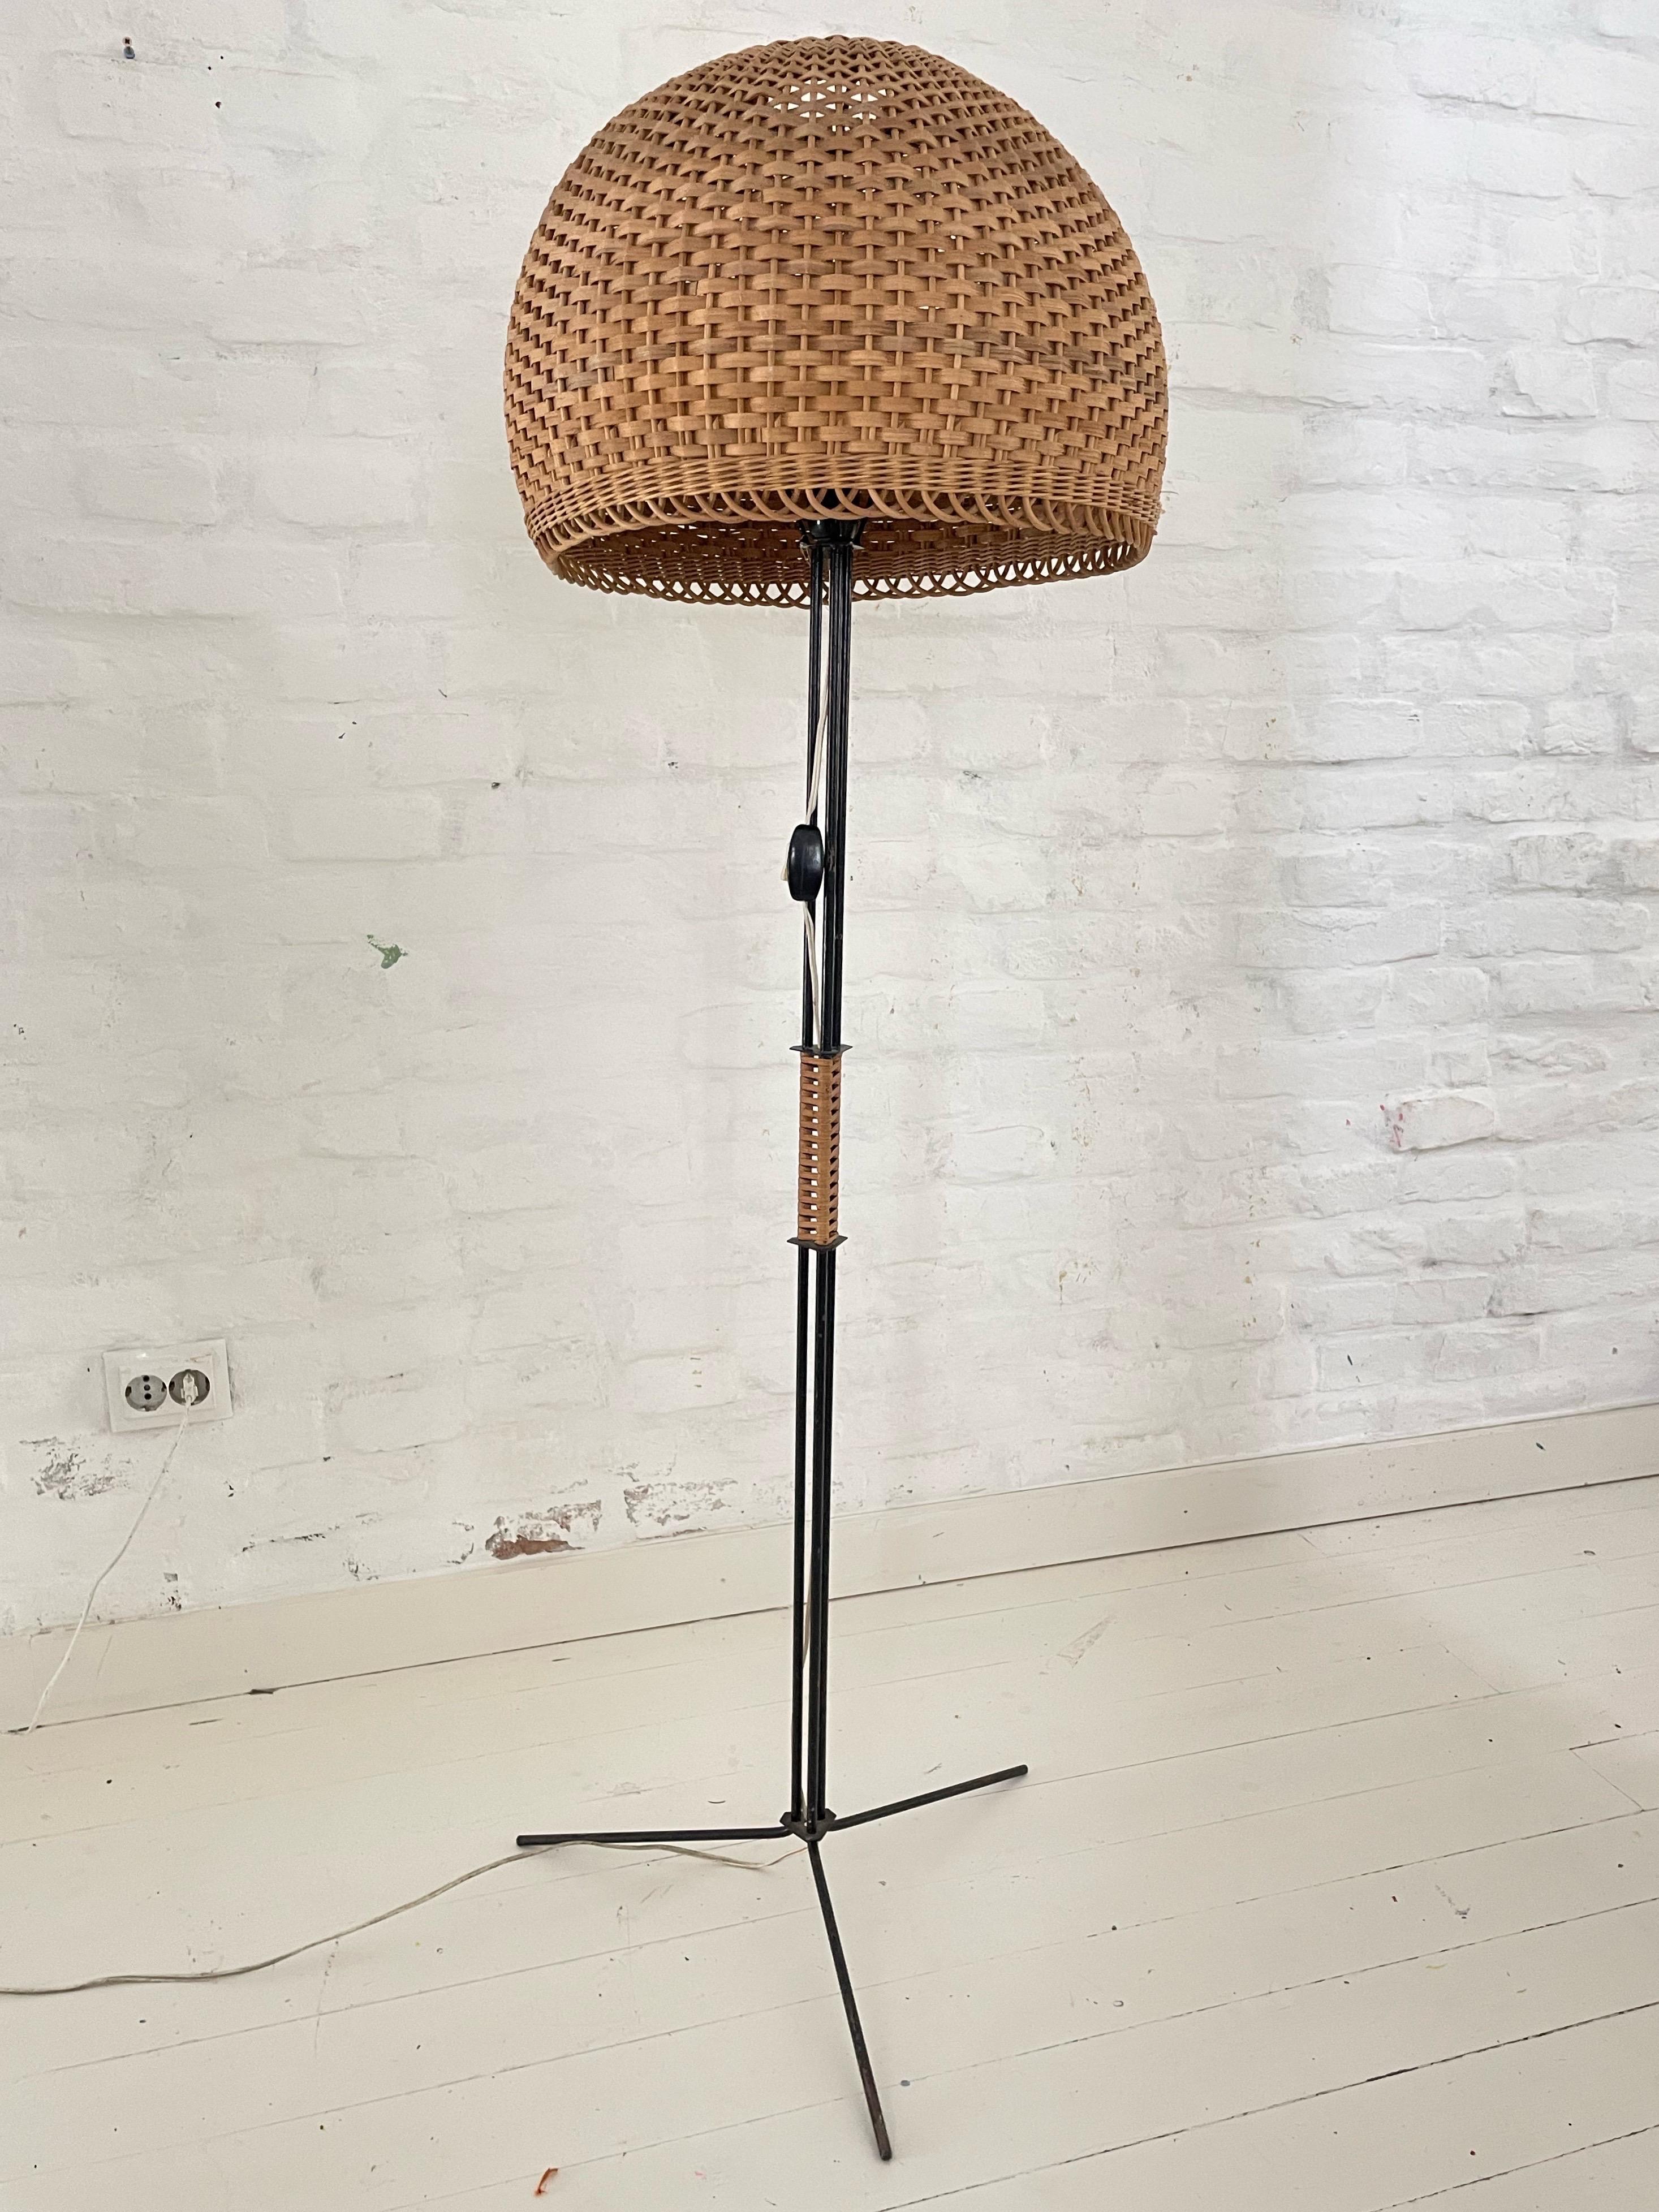 Beautiful Mid-Century Modern tripod floor lamp with basket shade great minimalistic 1950s design. In good vintage condition. The metal frame is painted black and has a wicker wrapped handle. Fully functional with one E27 socket. Works with 220V and